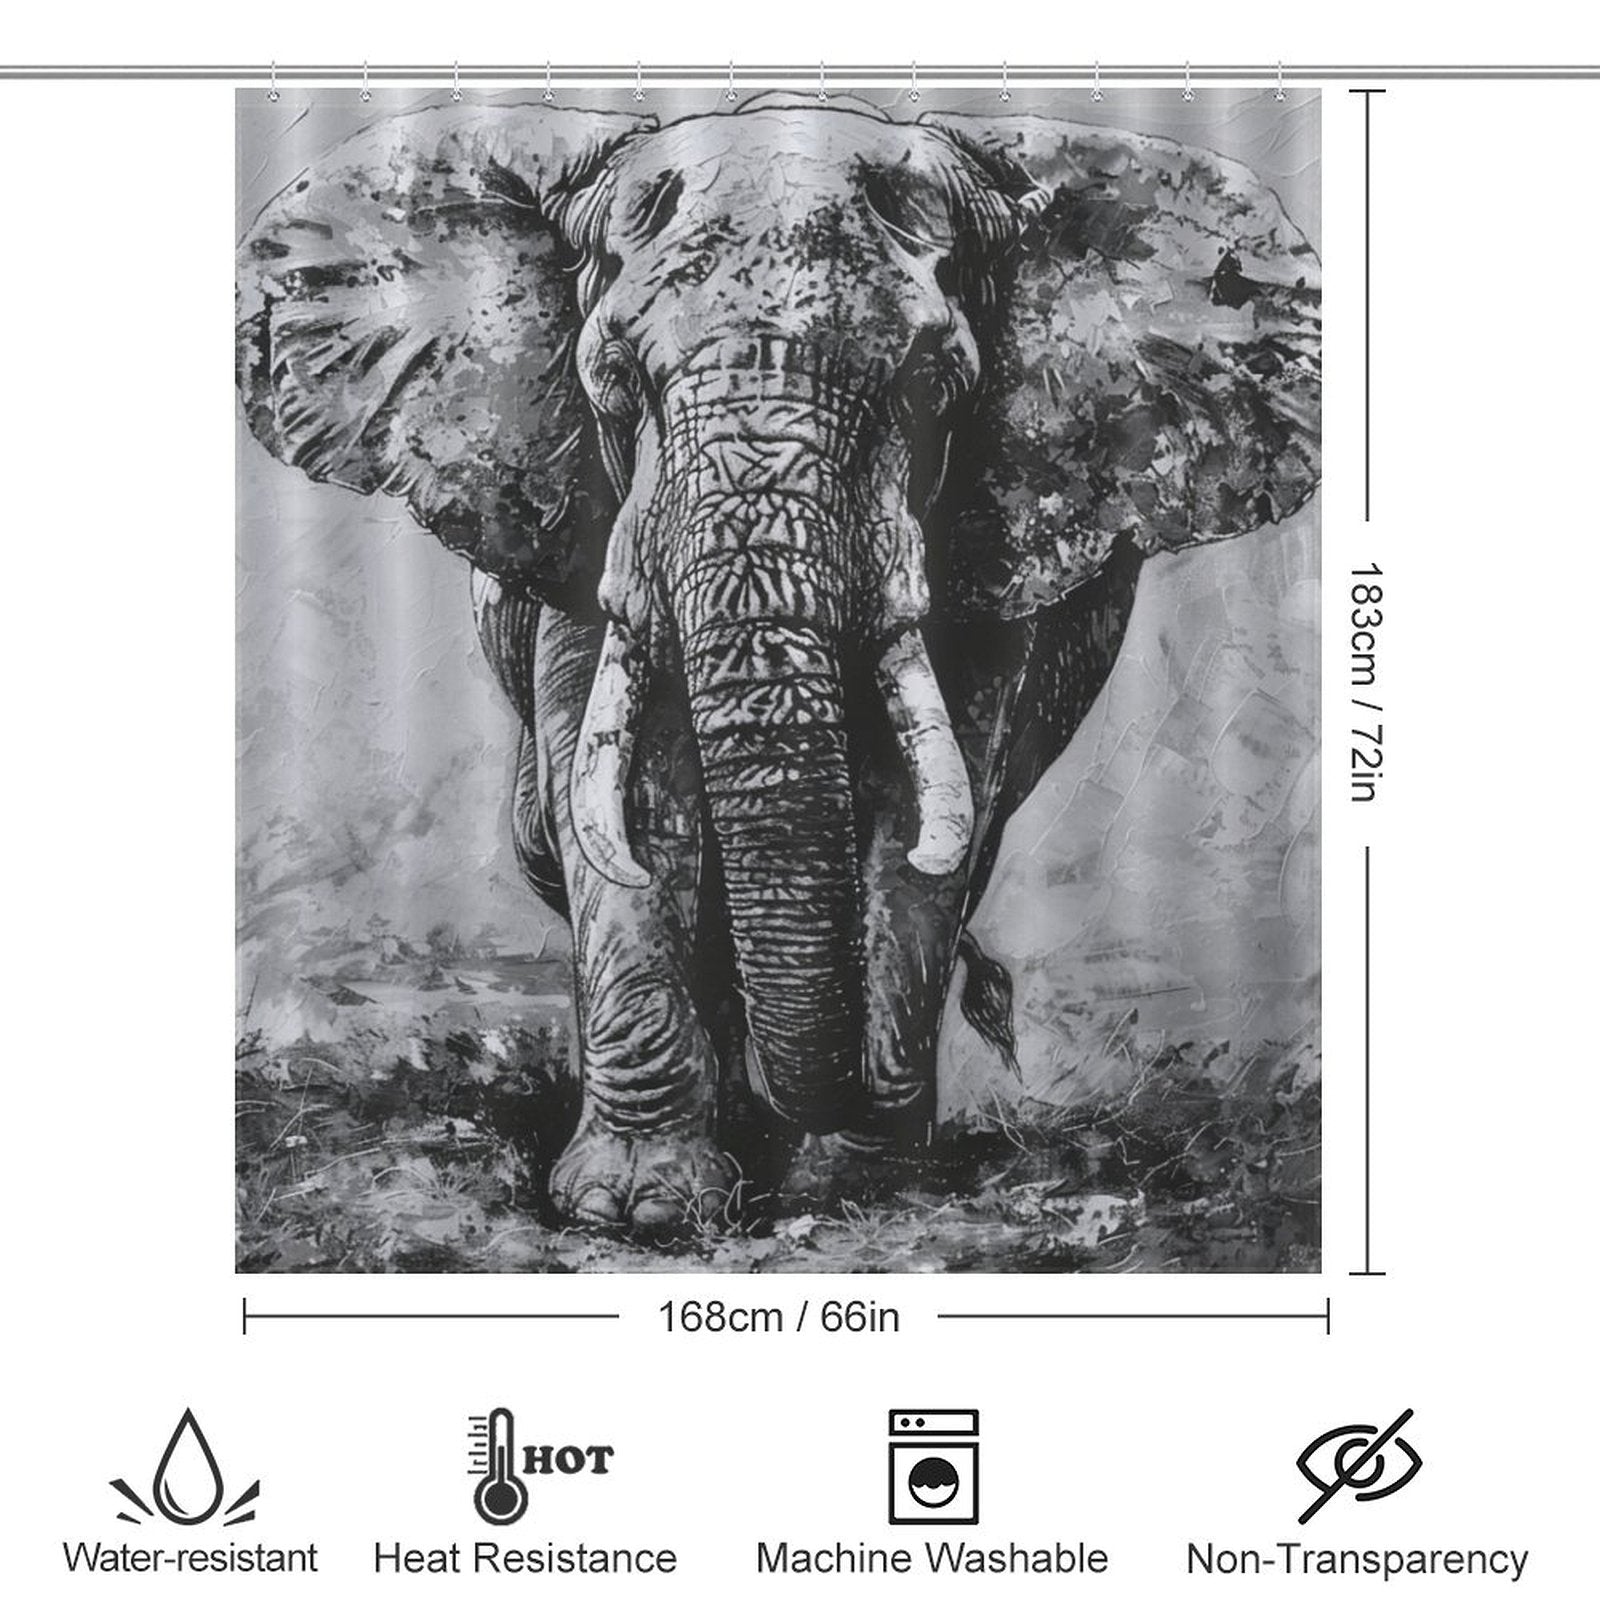 Elegant Black and White Elephant Shower Curtain-Cottoncat by Cotton Cat featuring a detailed, black and white image of an elephant. Measuring 183 cm by 168 cm, it is water-resistant, heat-resistant, machine washable, and non-transparent—perfect for adding a touch of sophistication to your bathroom decor.